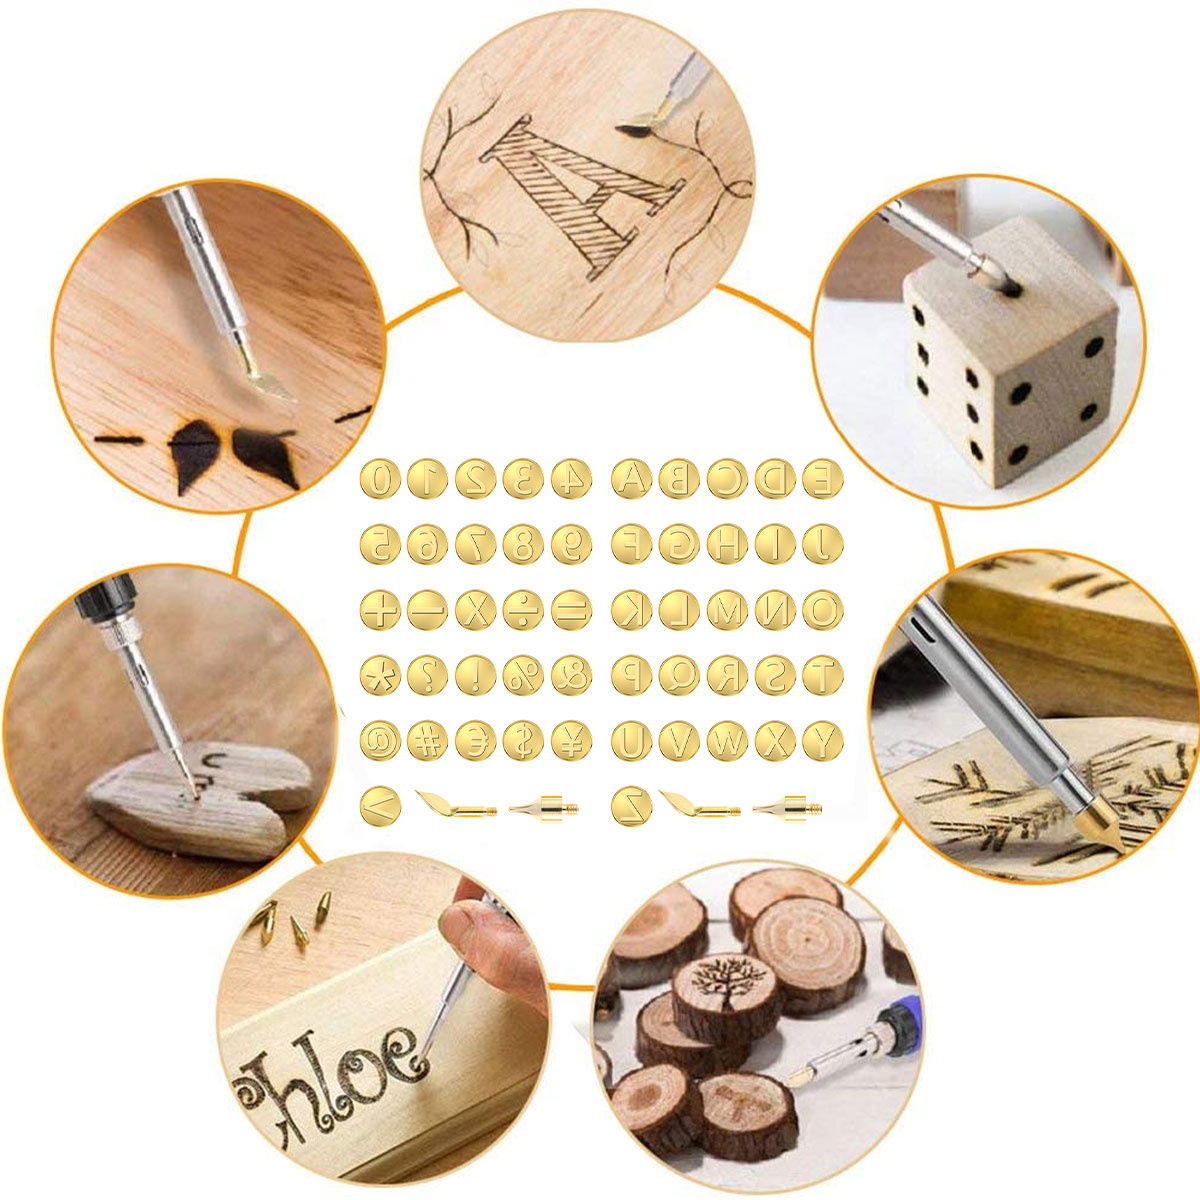 60 pcs Wood Burning Tips Set and Stencils, Pyrography Wood Burning Alphabet  Numbers Symbols Stamps Set（ Include 54 Assorted Wood Burning/Carving/Embossing  & Soldering Tips and 6 Stencils）